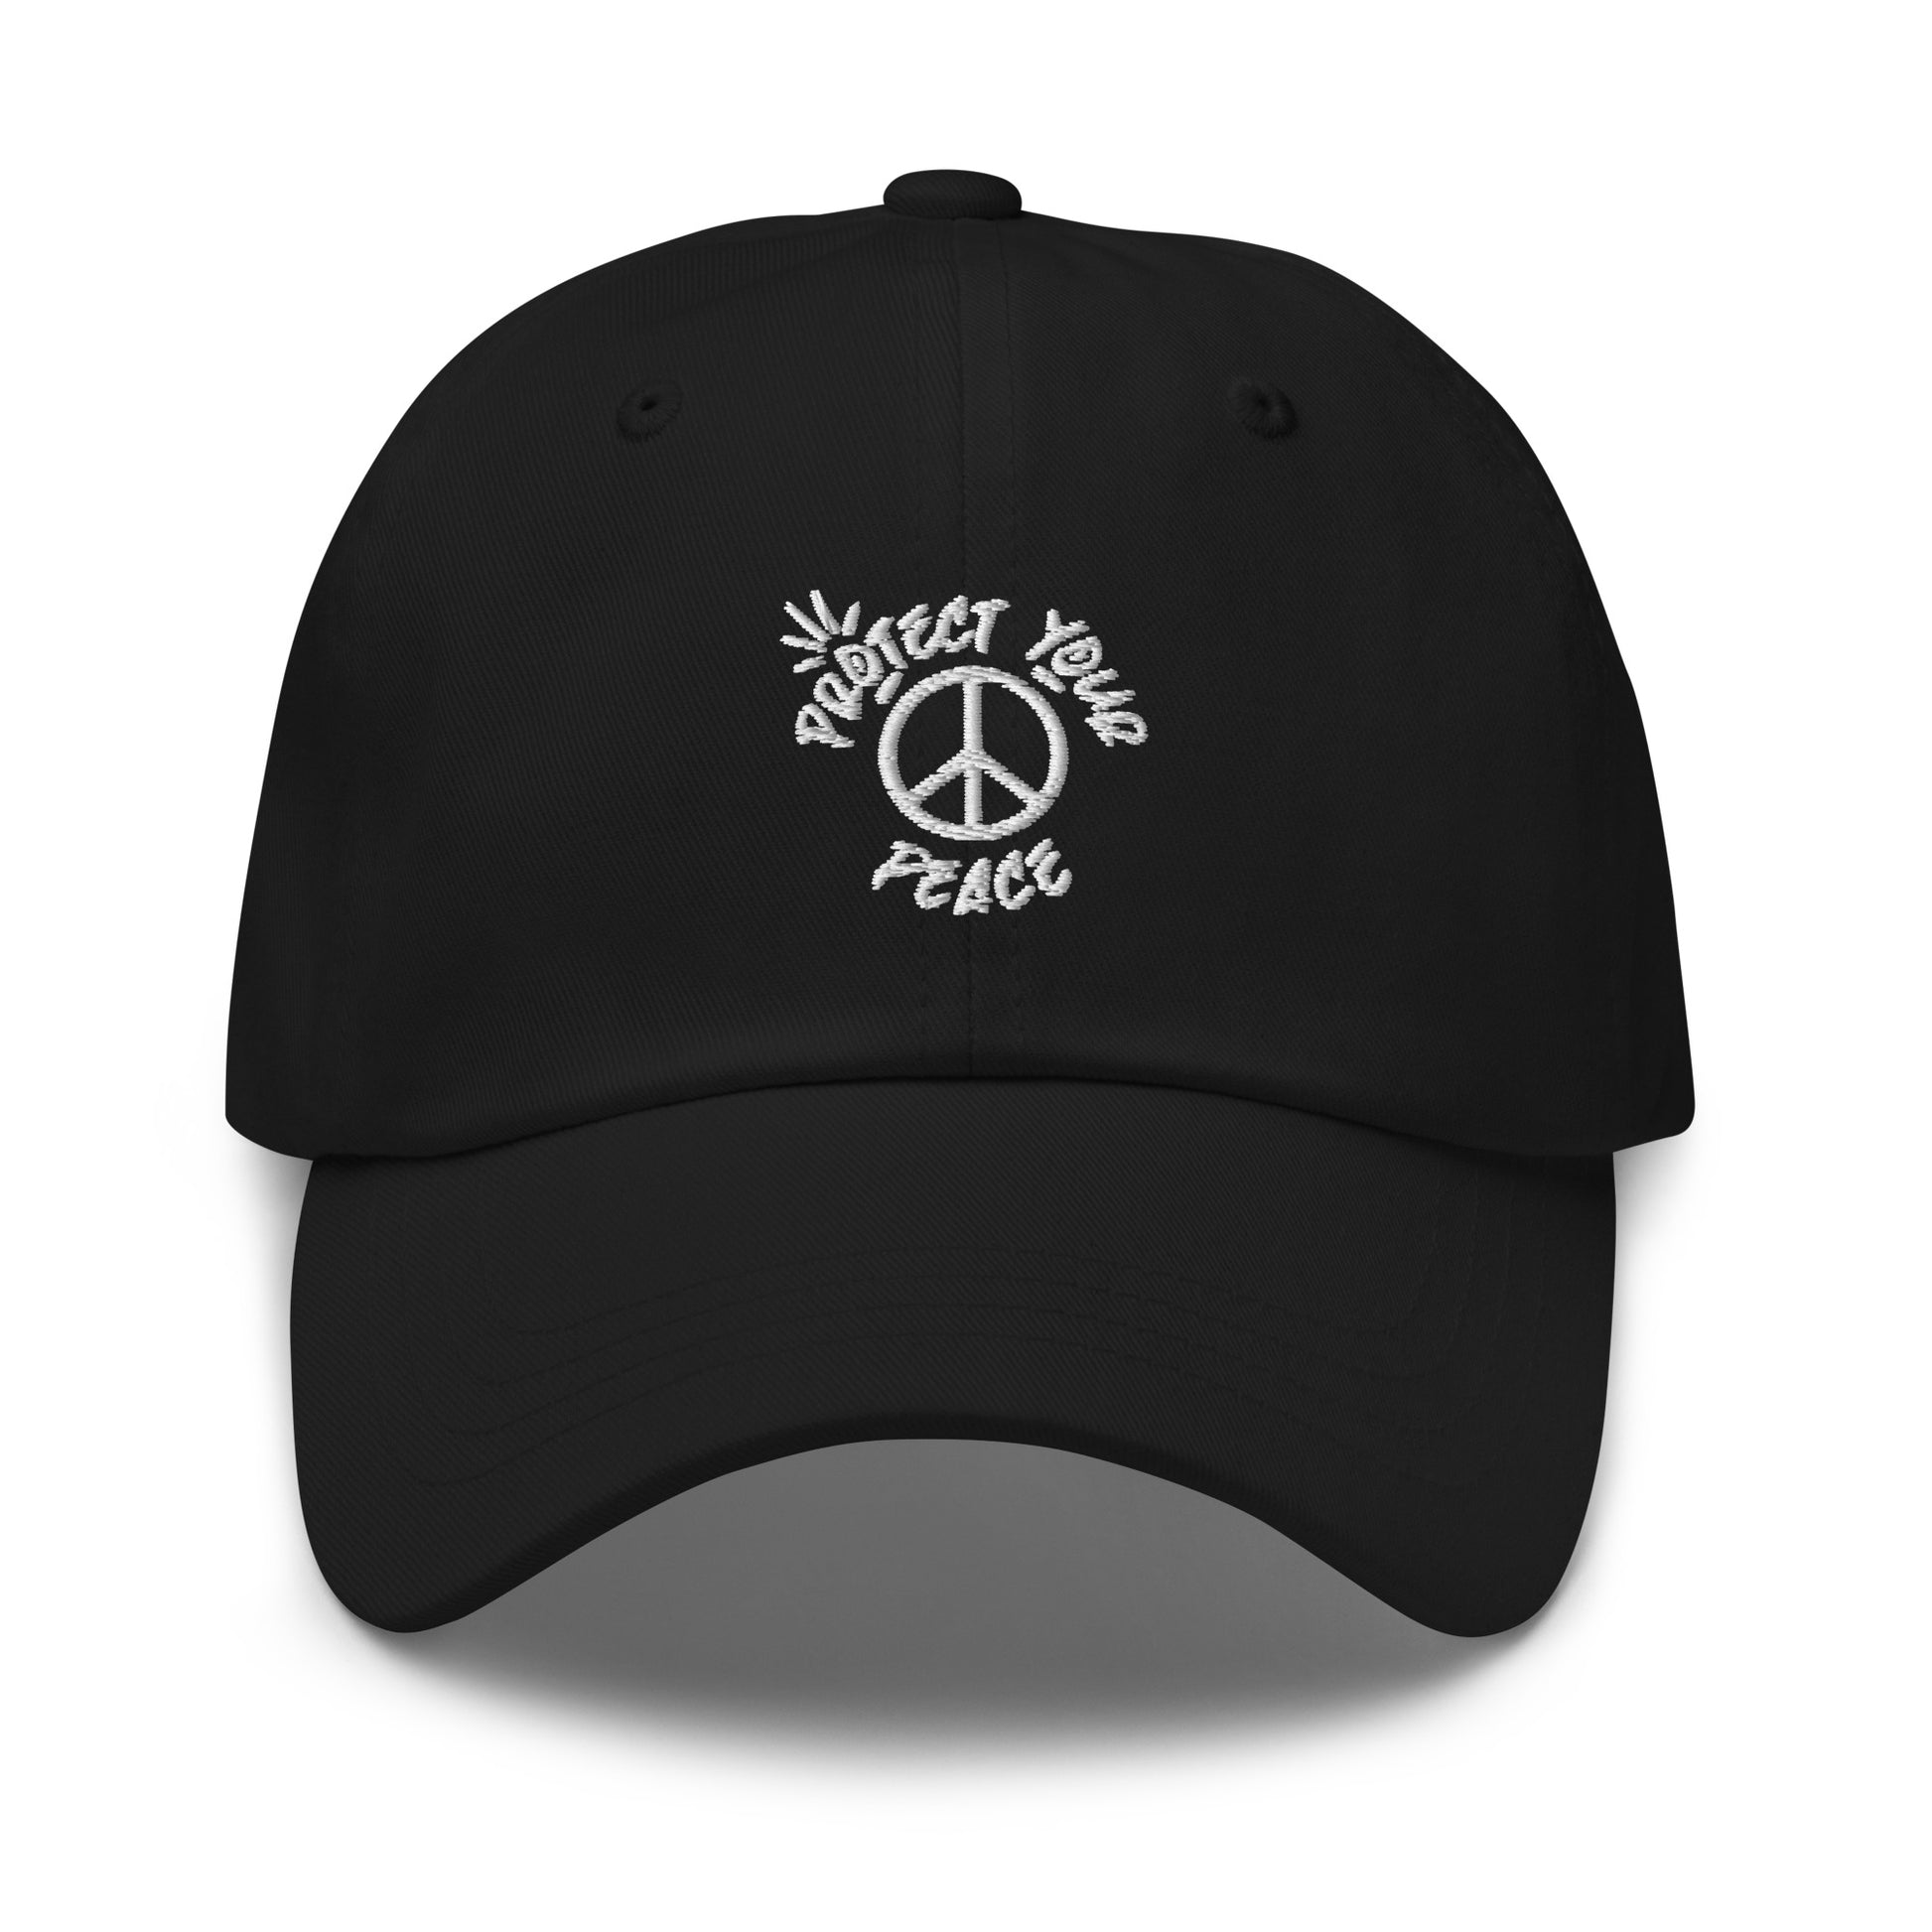 "Chic 'Protect Your Peace Hat' from Tribe of Weirdos featuring a bold statement embroidery, perfect for fashionably upholding your serenity."